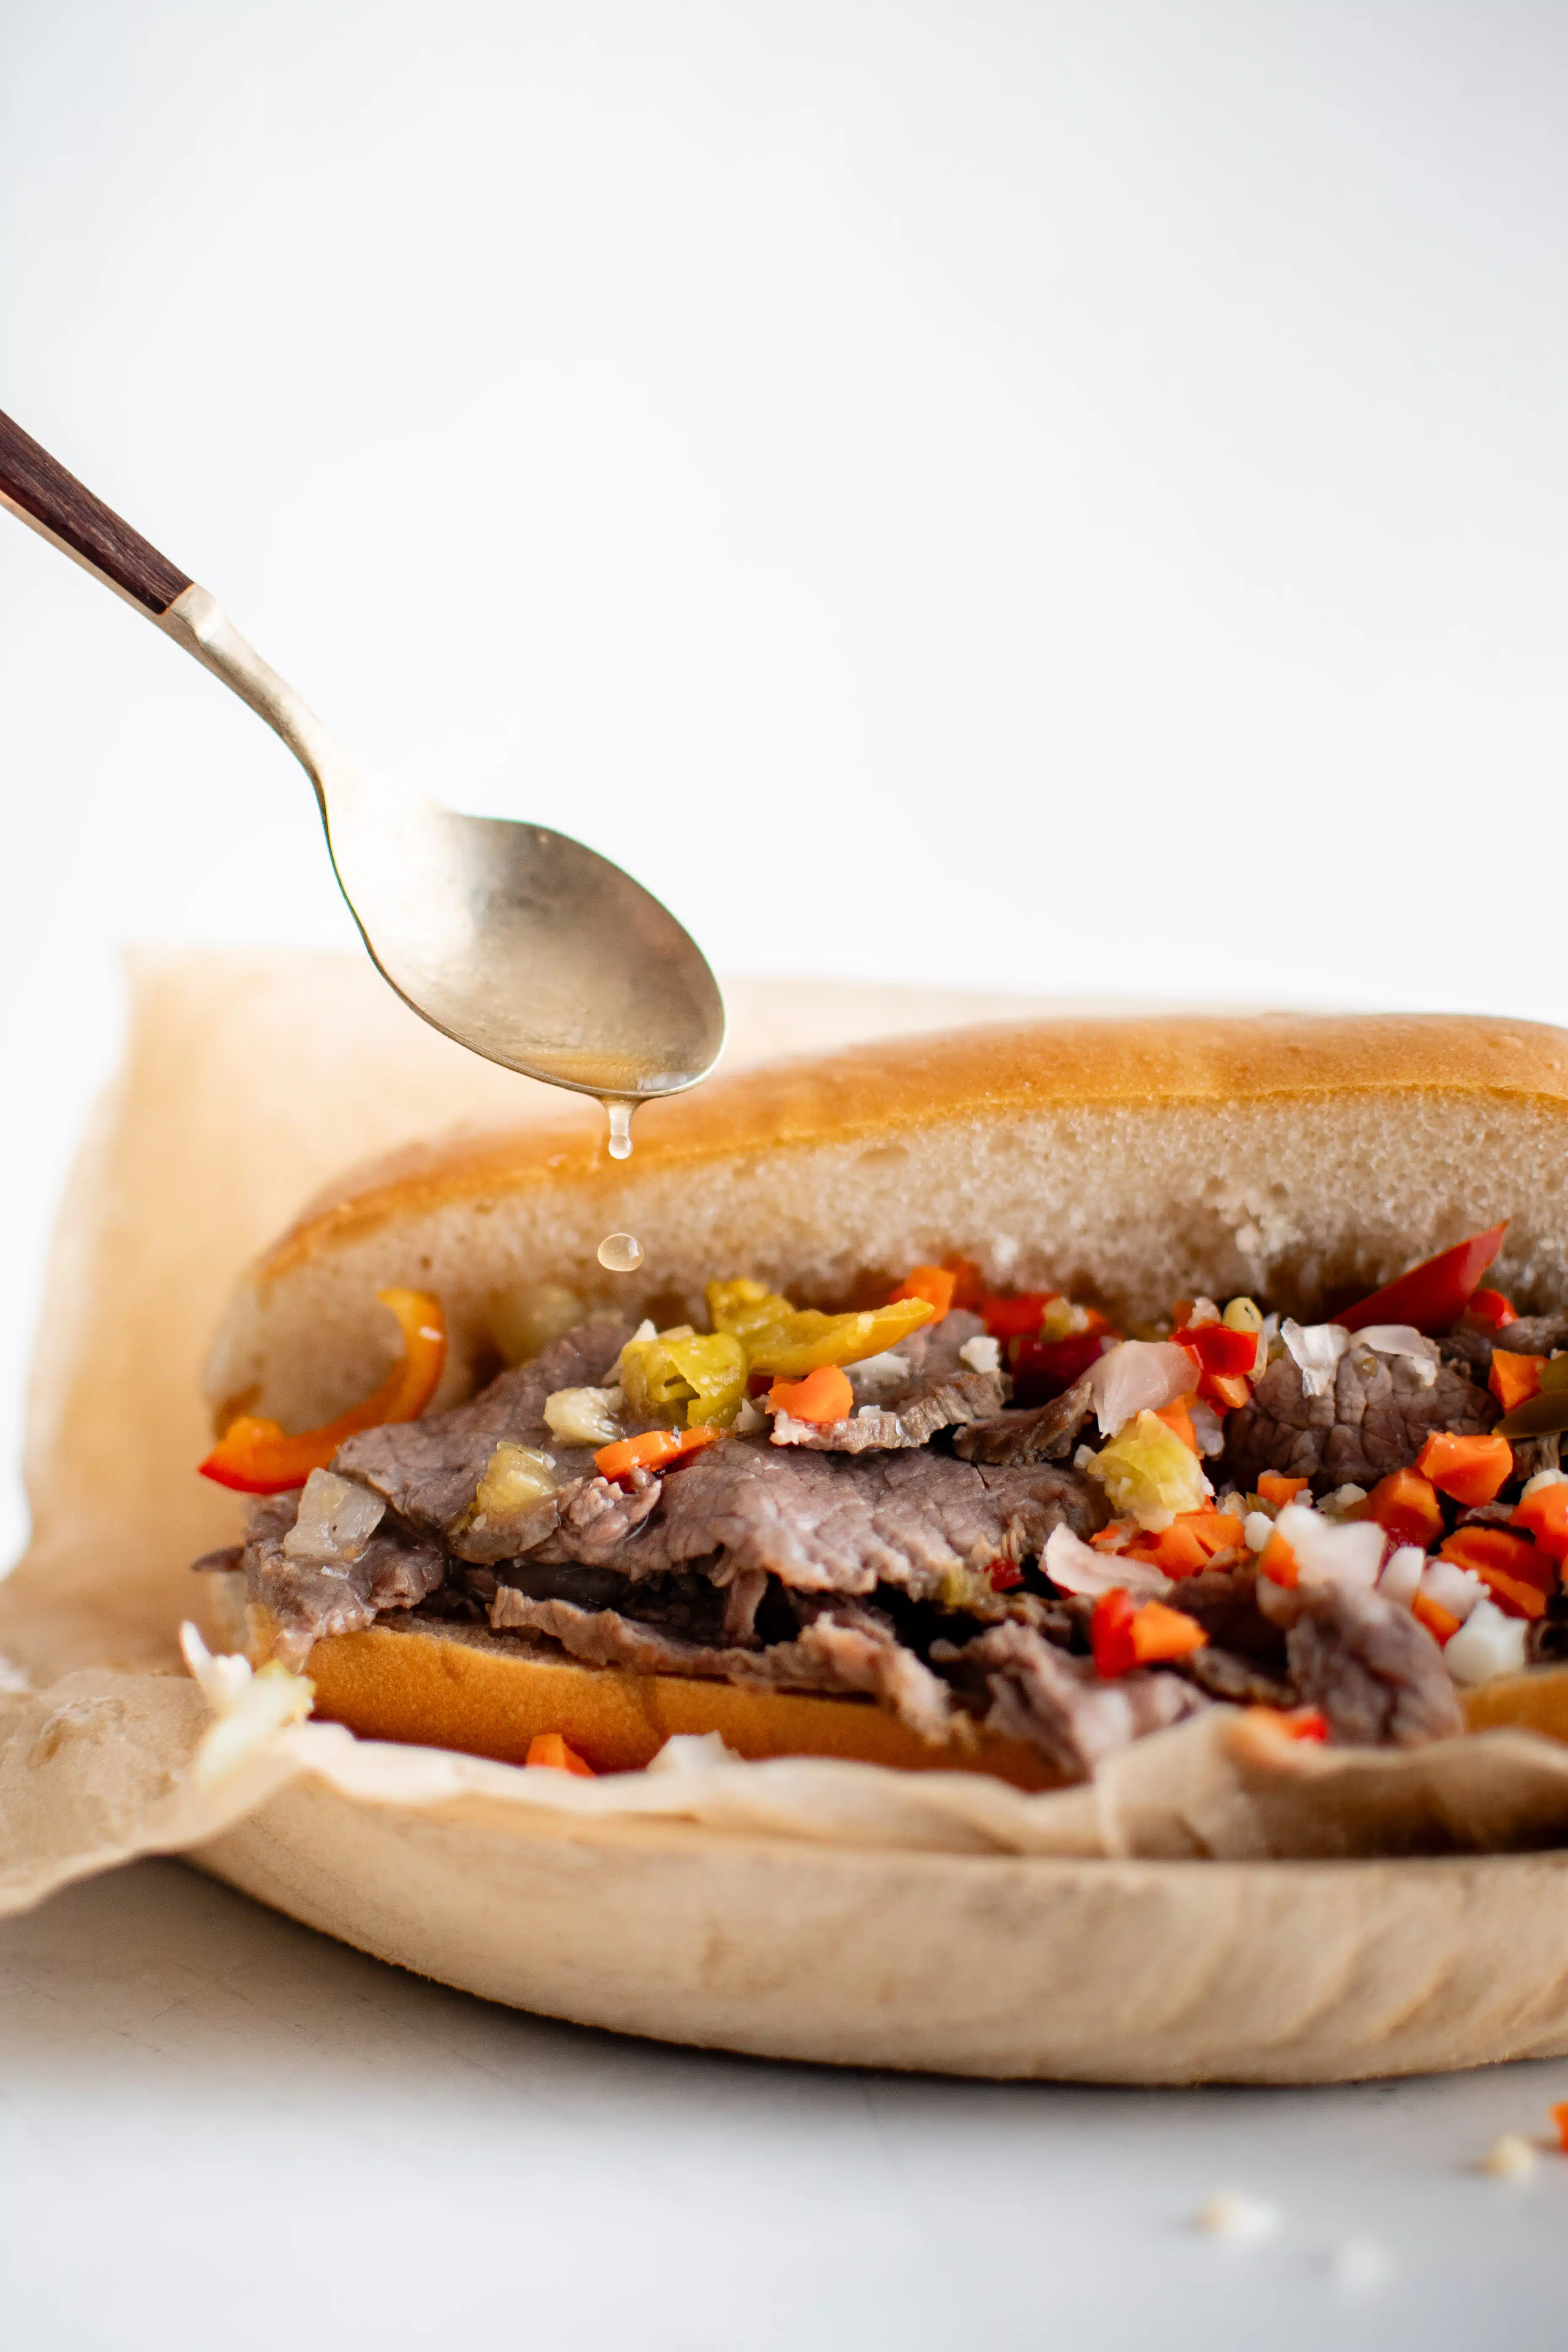 Drizzling au jus over an Italian roll topped with thinly sliced beef topped with chopped Giardiniera and hot cherry peppers served on a white plate lined with parchment paper.